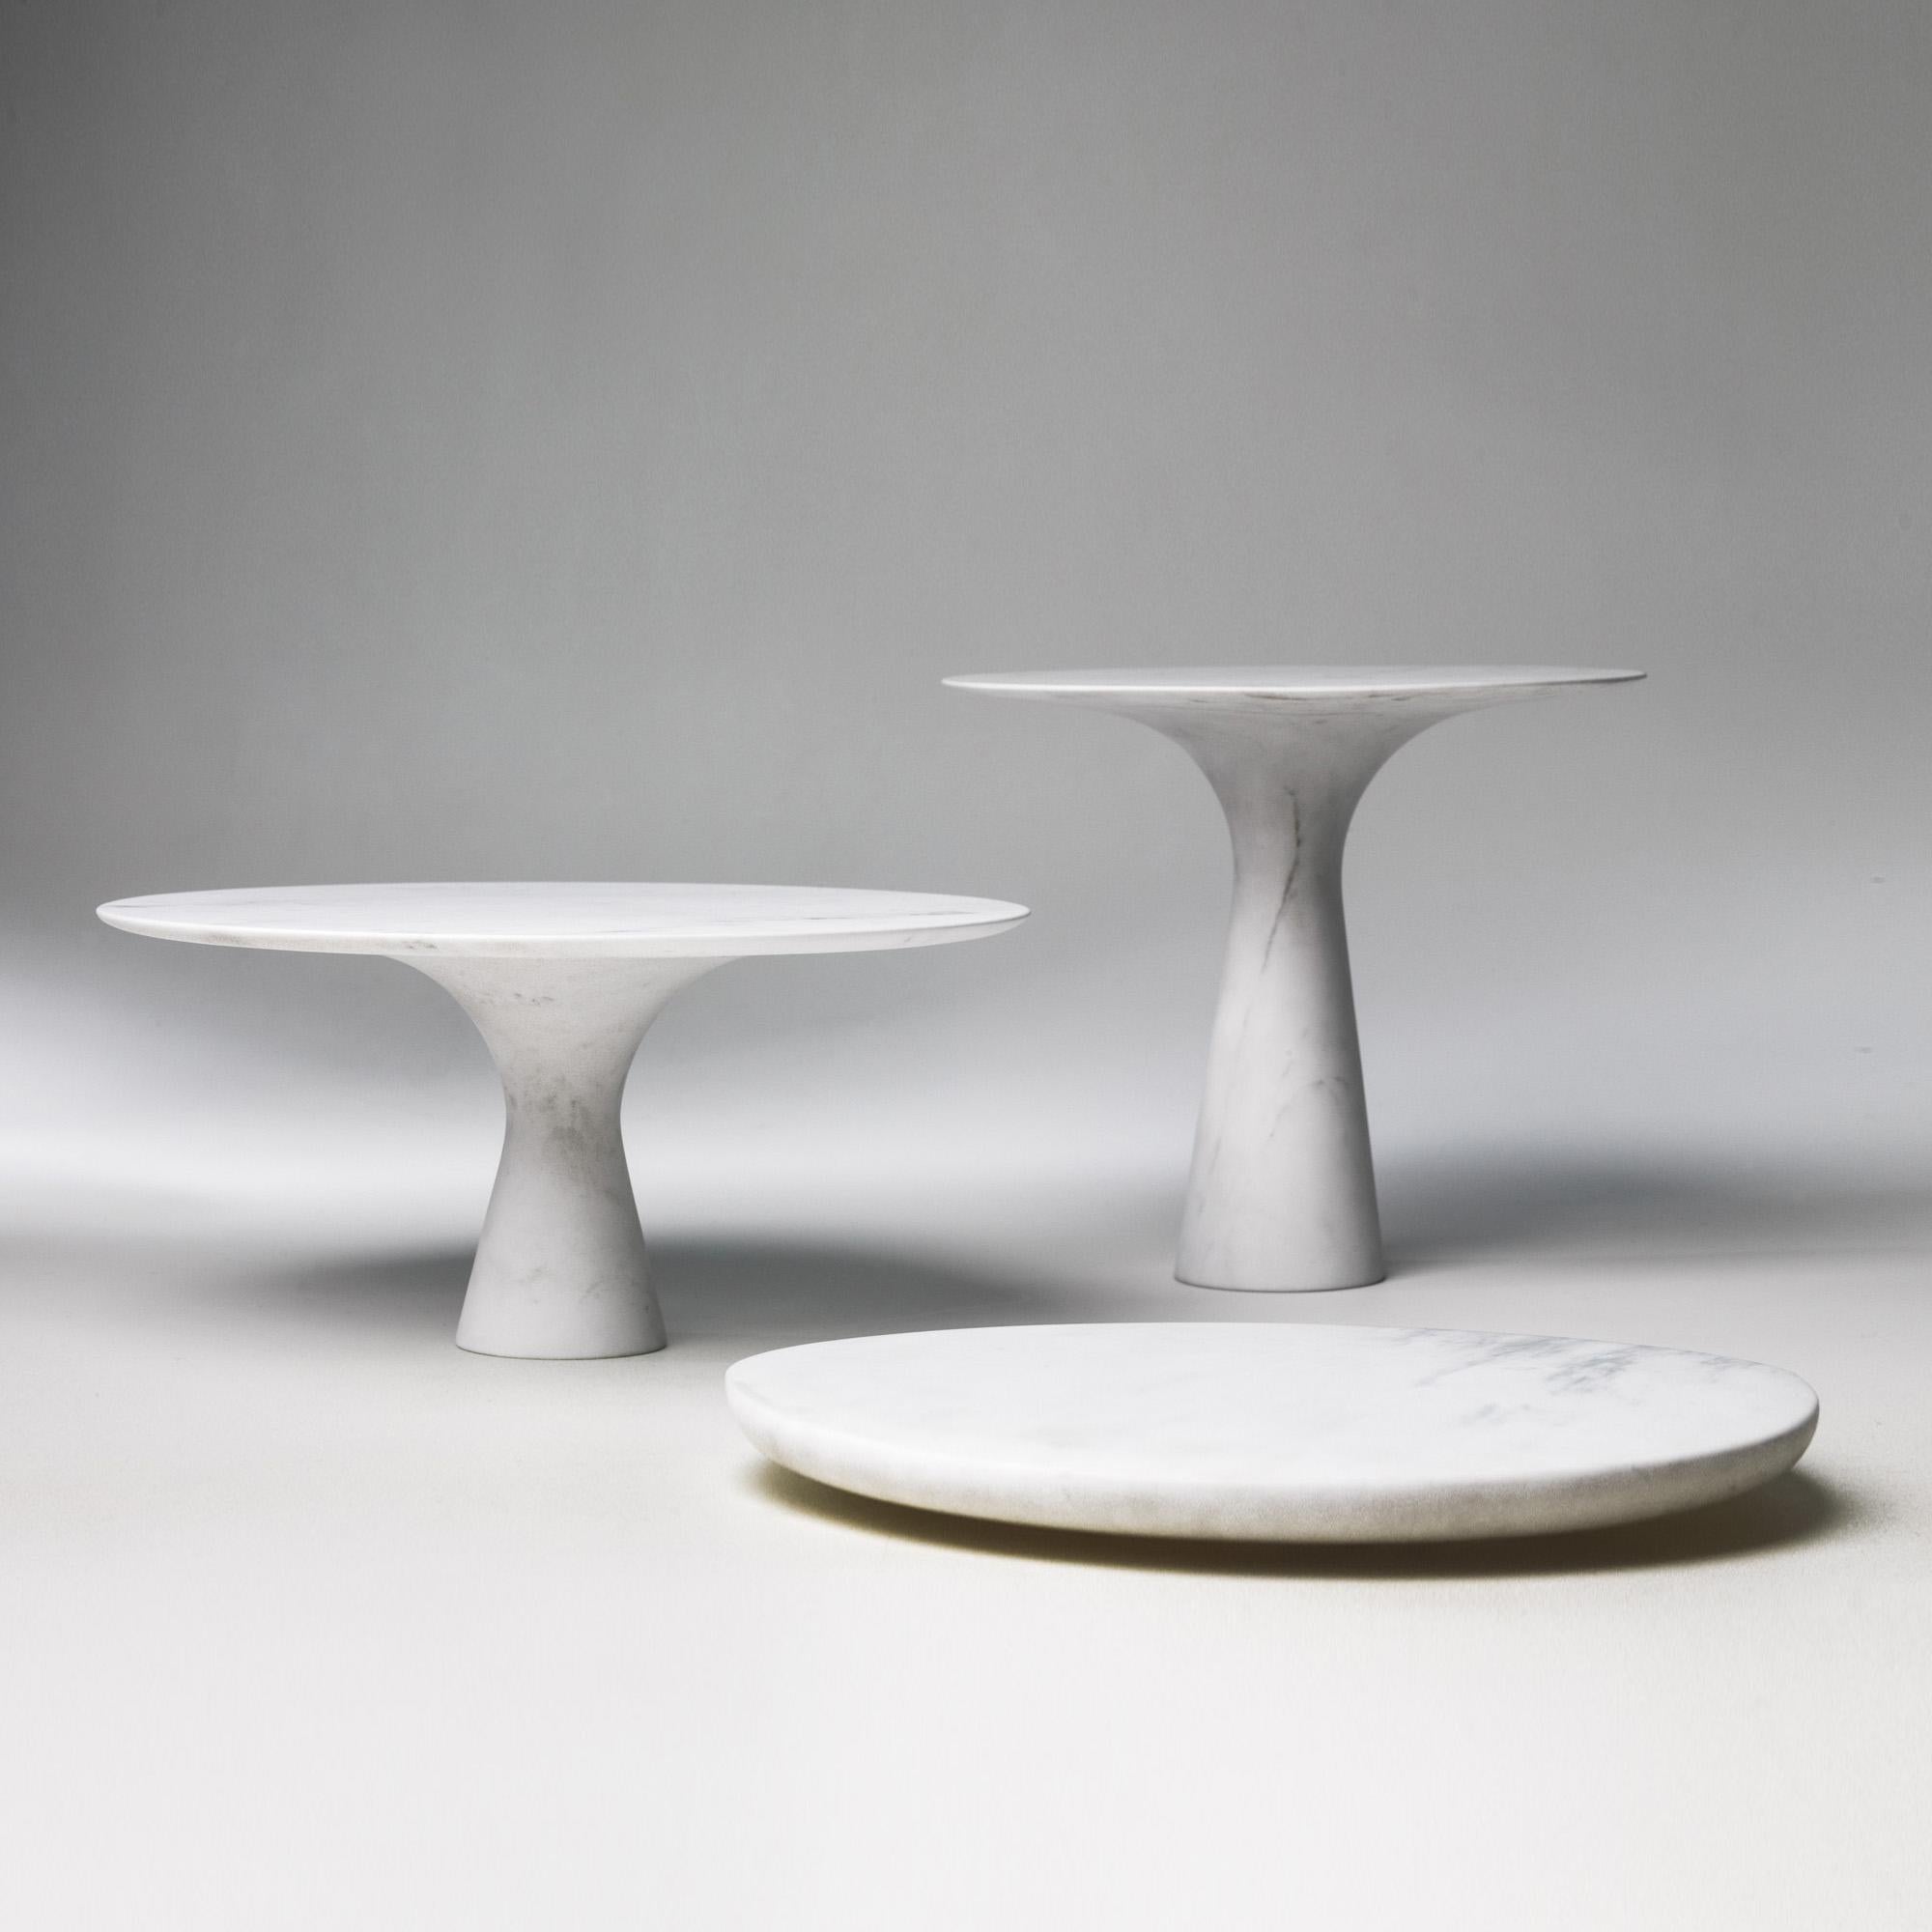 Set of 3 Refined Contemporary marble Kynos cake stands and plate
Signed by Leo Aerts.
Dimensions: 
D 26 x H 22.5 cm 
D 32 x H 15 cm
D 32 x H 2 cm
Material: Kynos marble
Technique: Polished, carved. 

Available in marble: kyknos, bianco